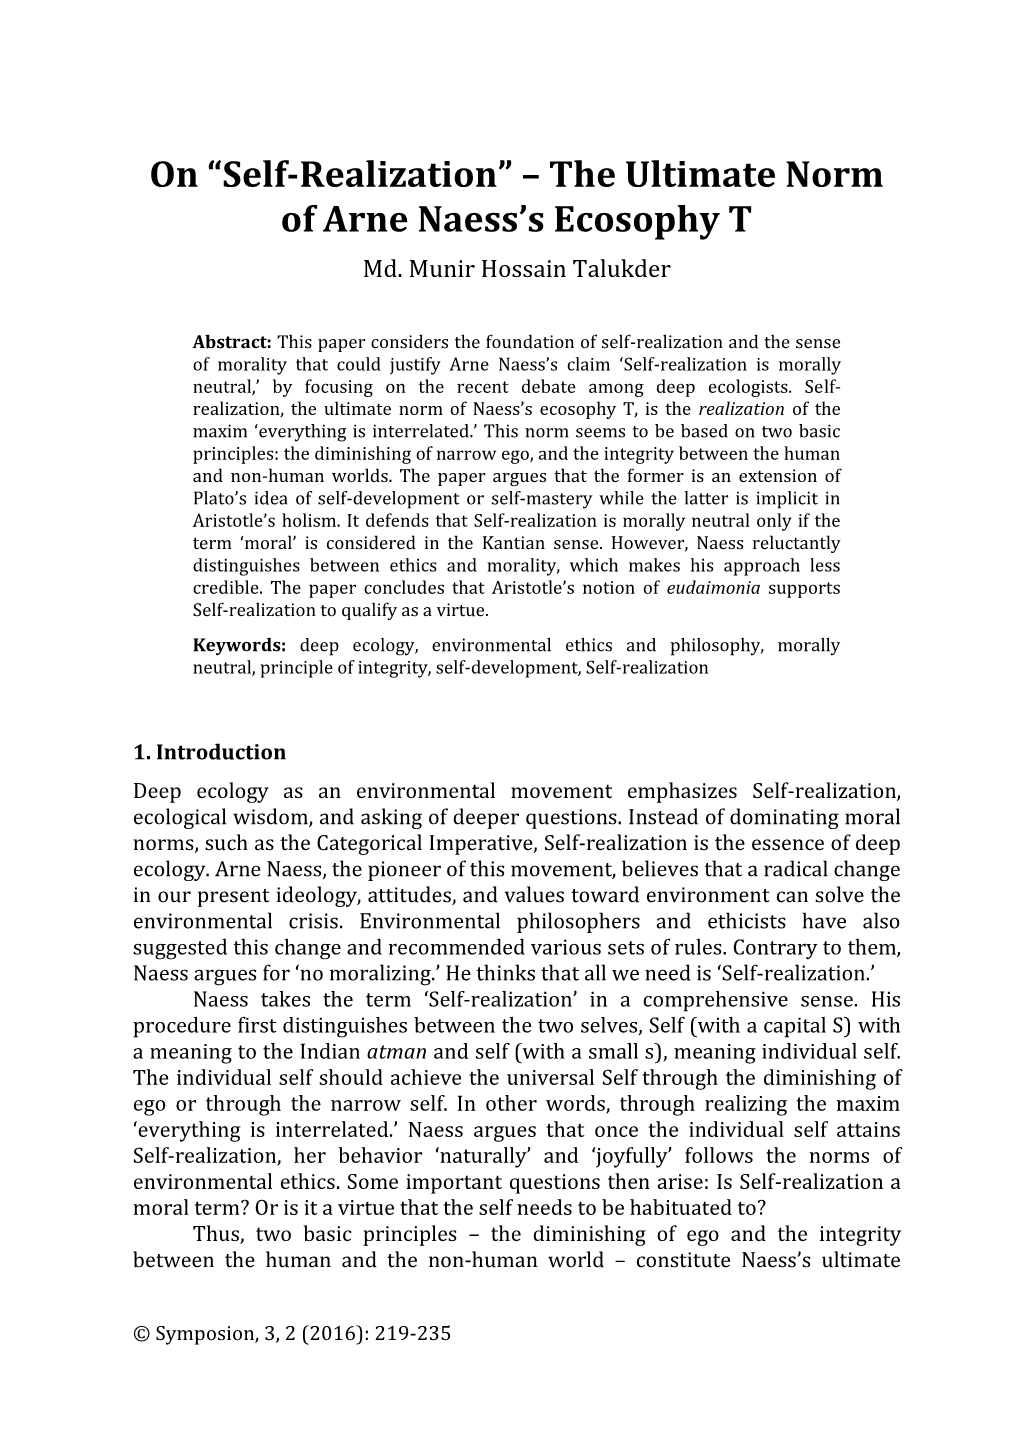 On “Self-Realization” – the Ultimate Norm of Arne Naess's Ecosophy T